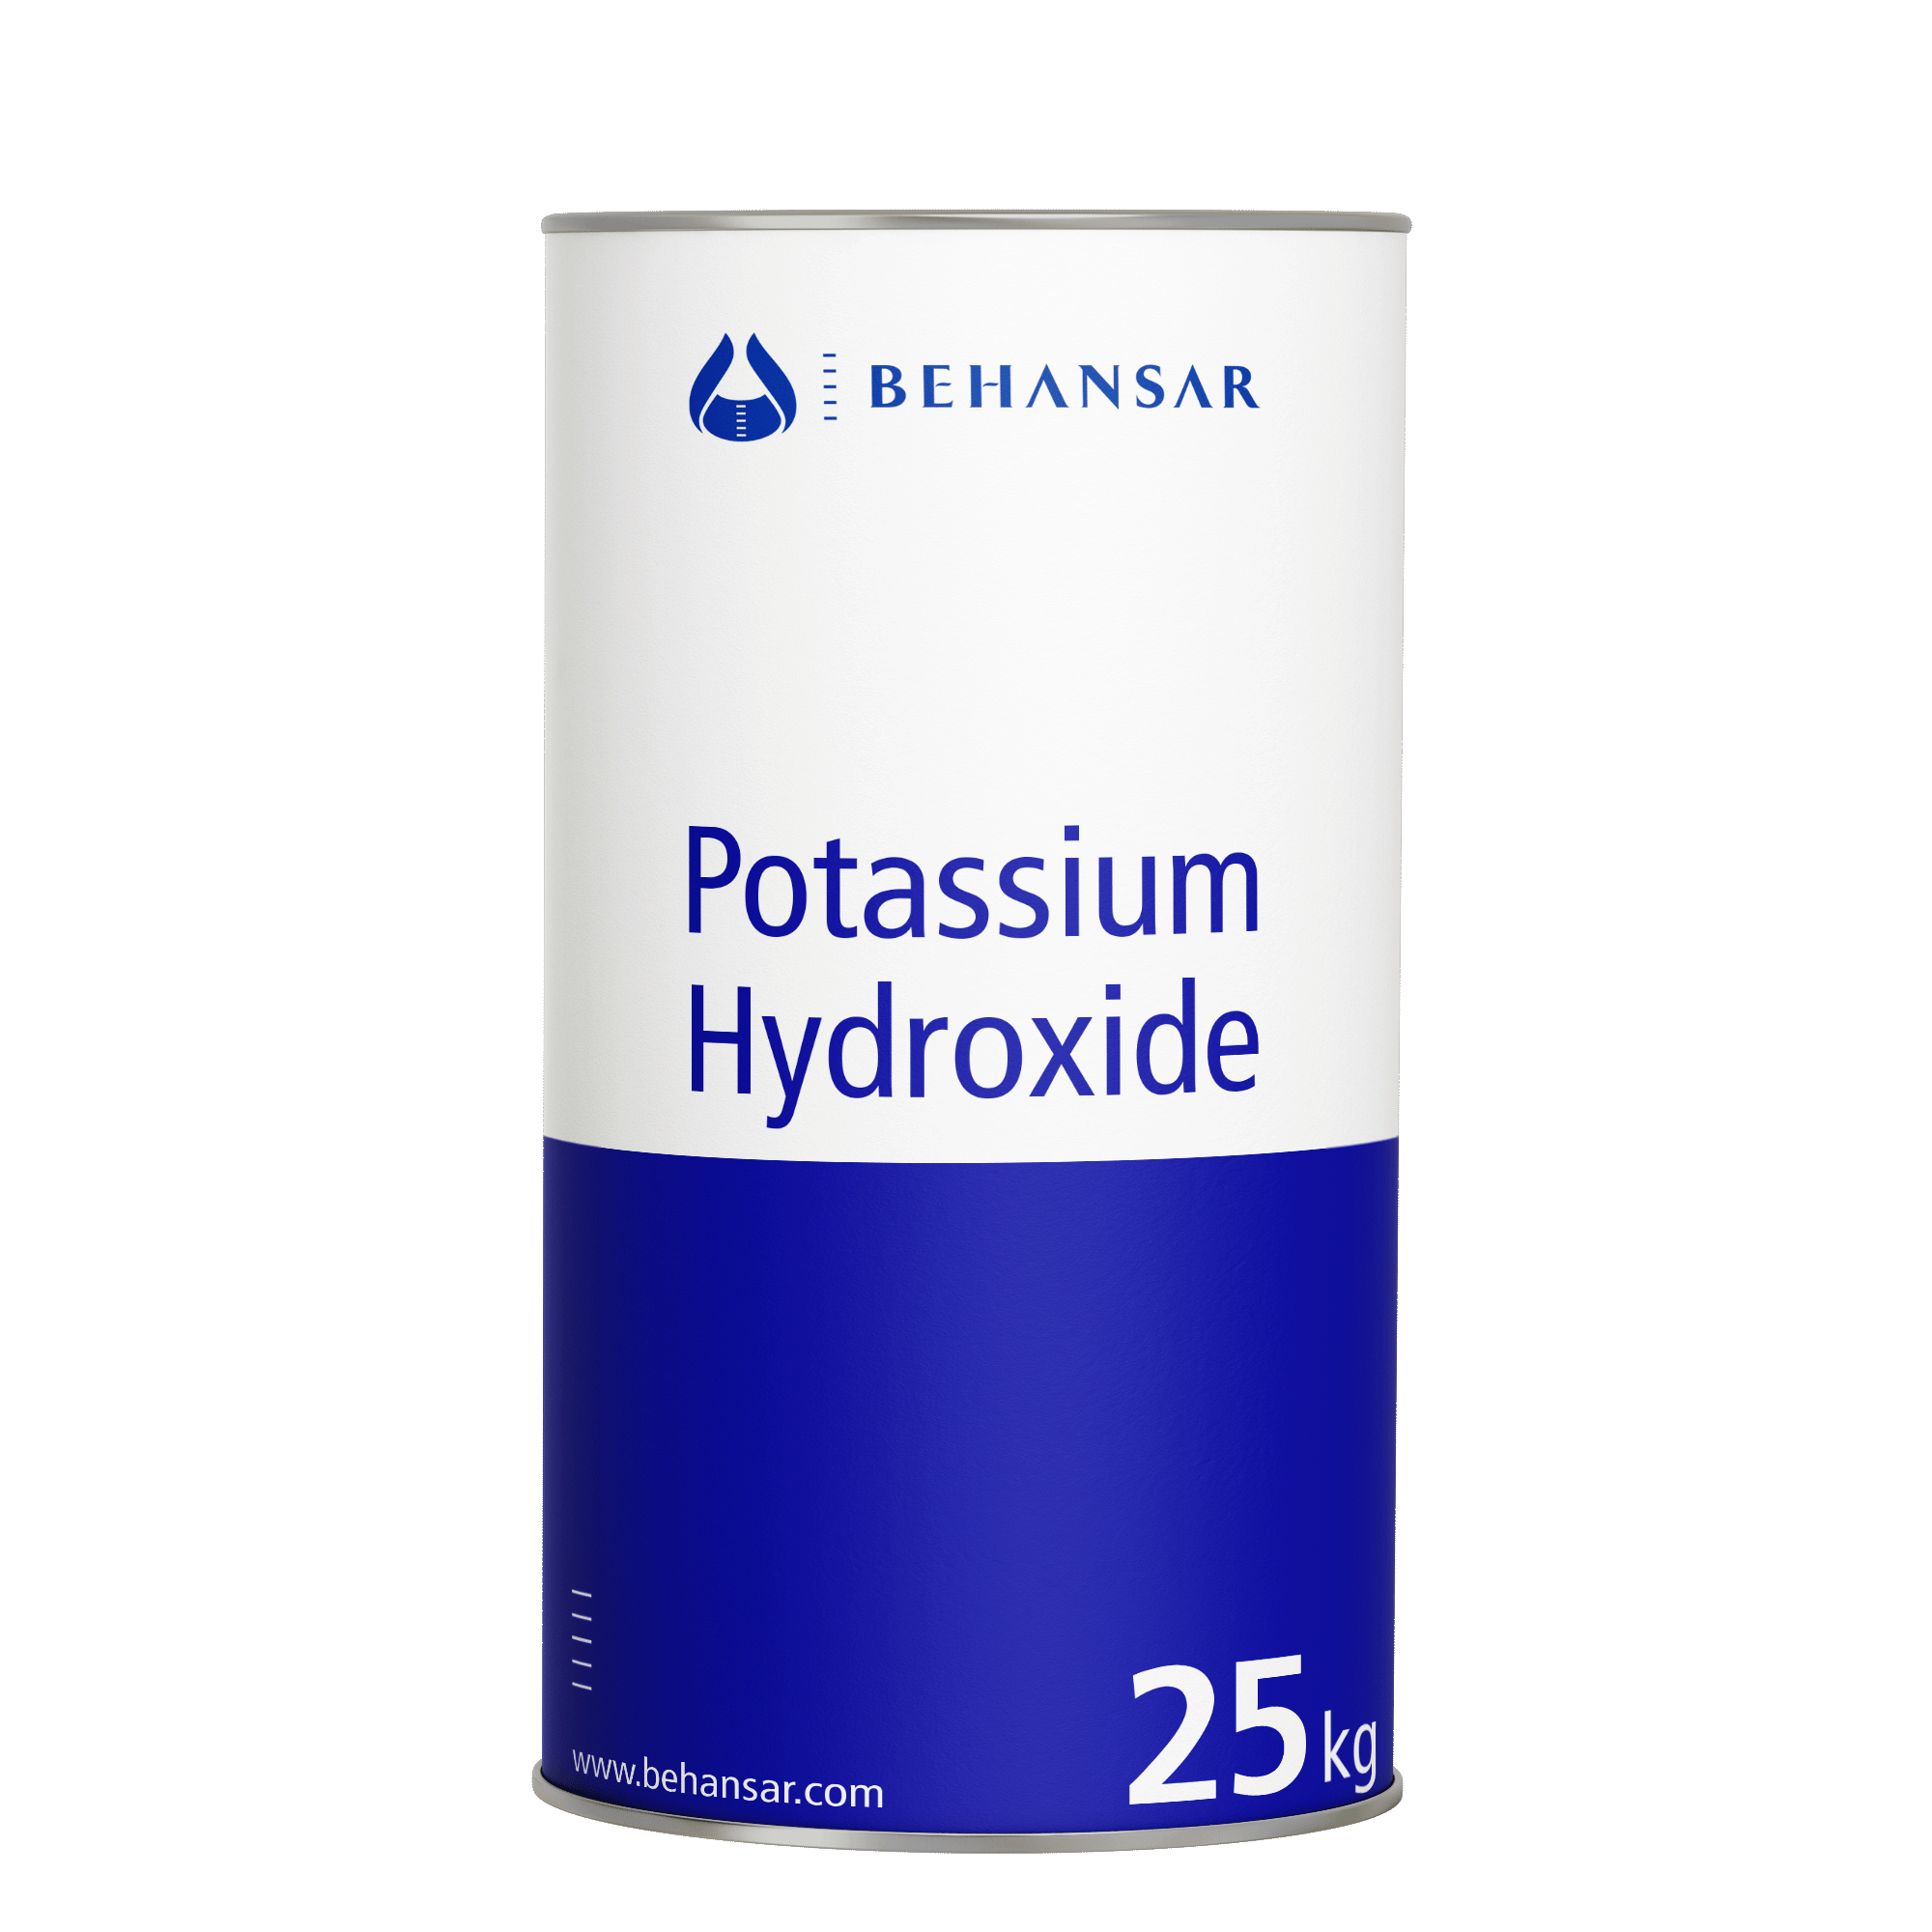 Potassium Hydroxide is one of the products of Behansar Co